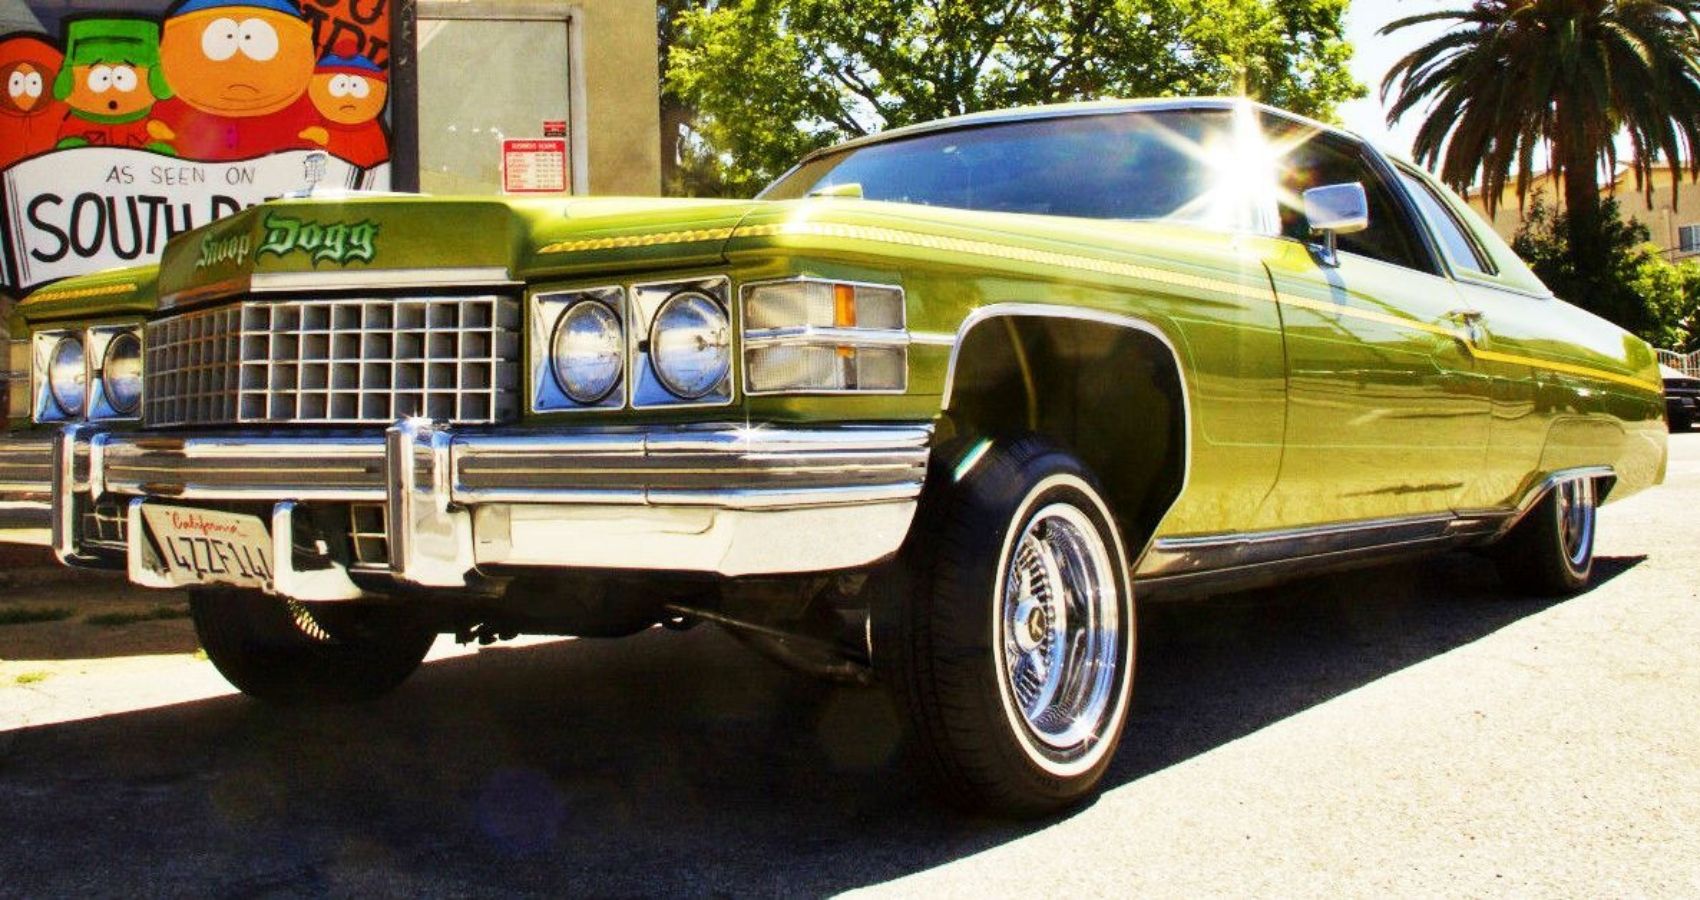 Lime-green-colored 1974 Cadillac Deville Lowrider